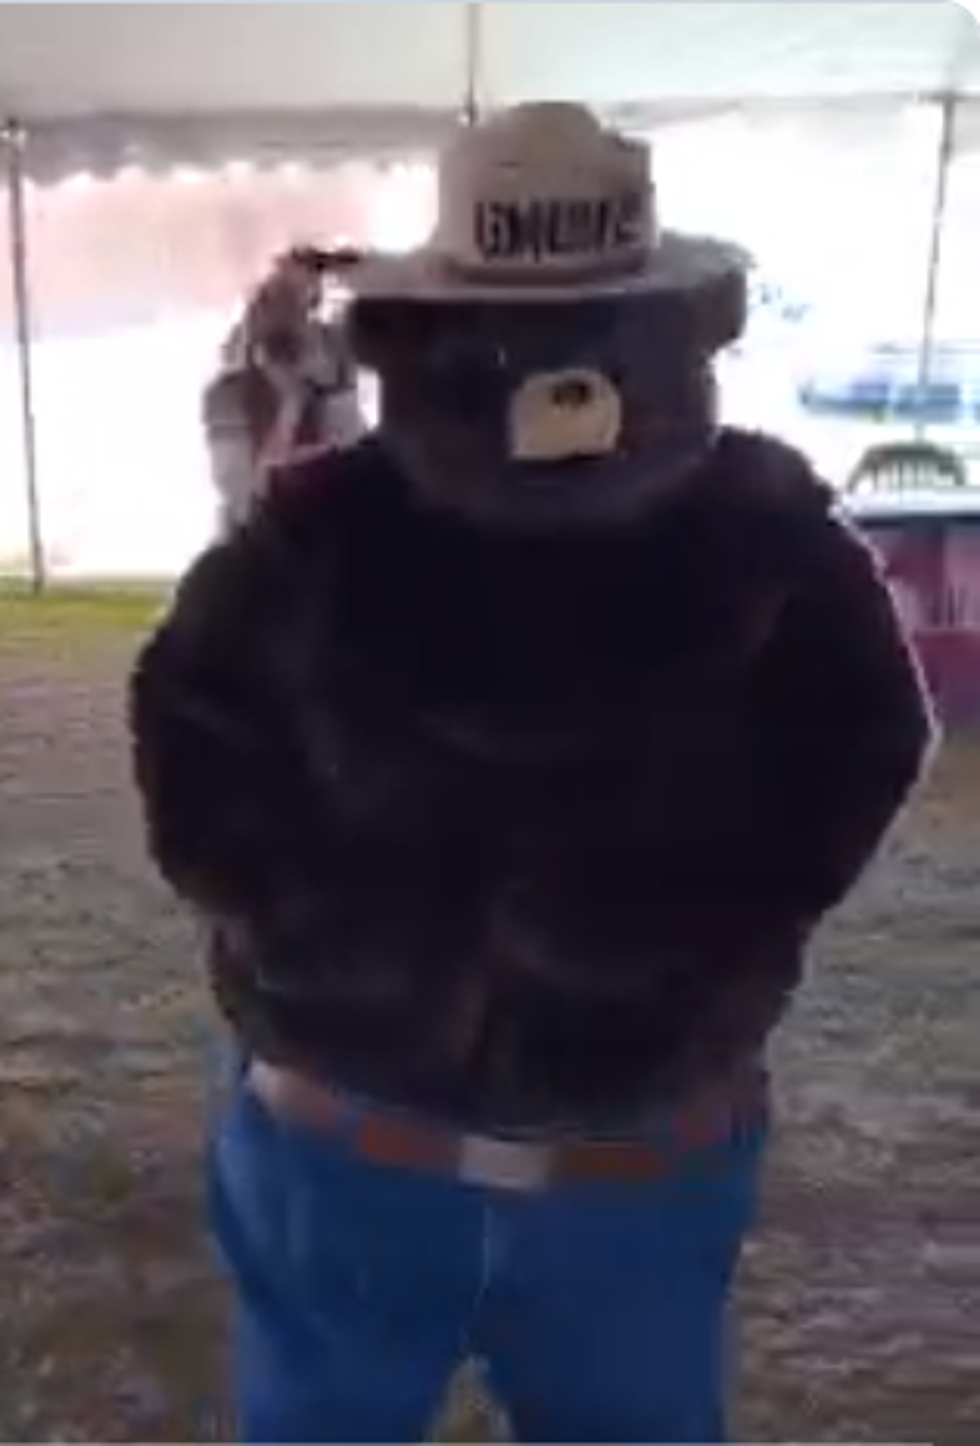 WATCH: Child Instantly Starts Crying At The Sight Of 75-Year-Old Bear